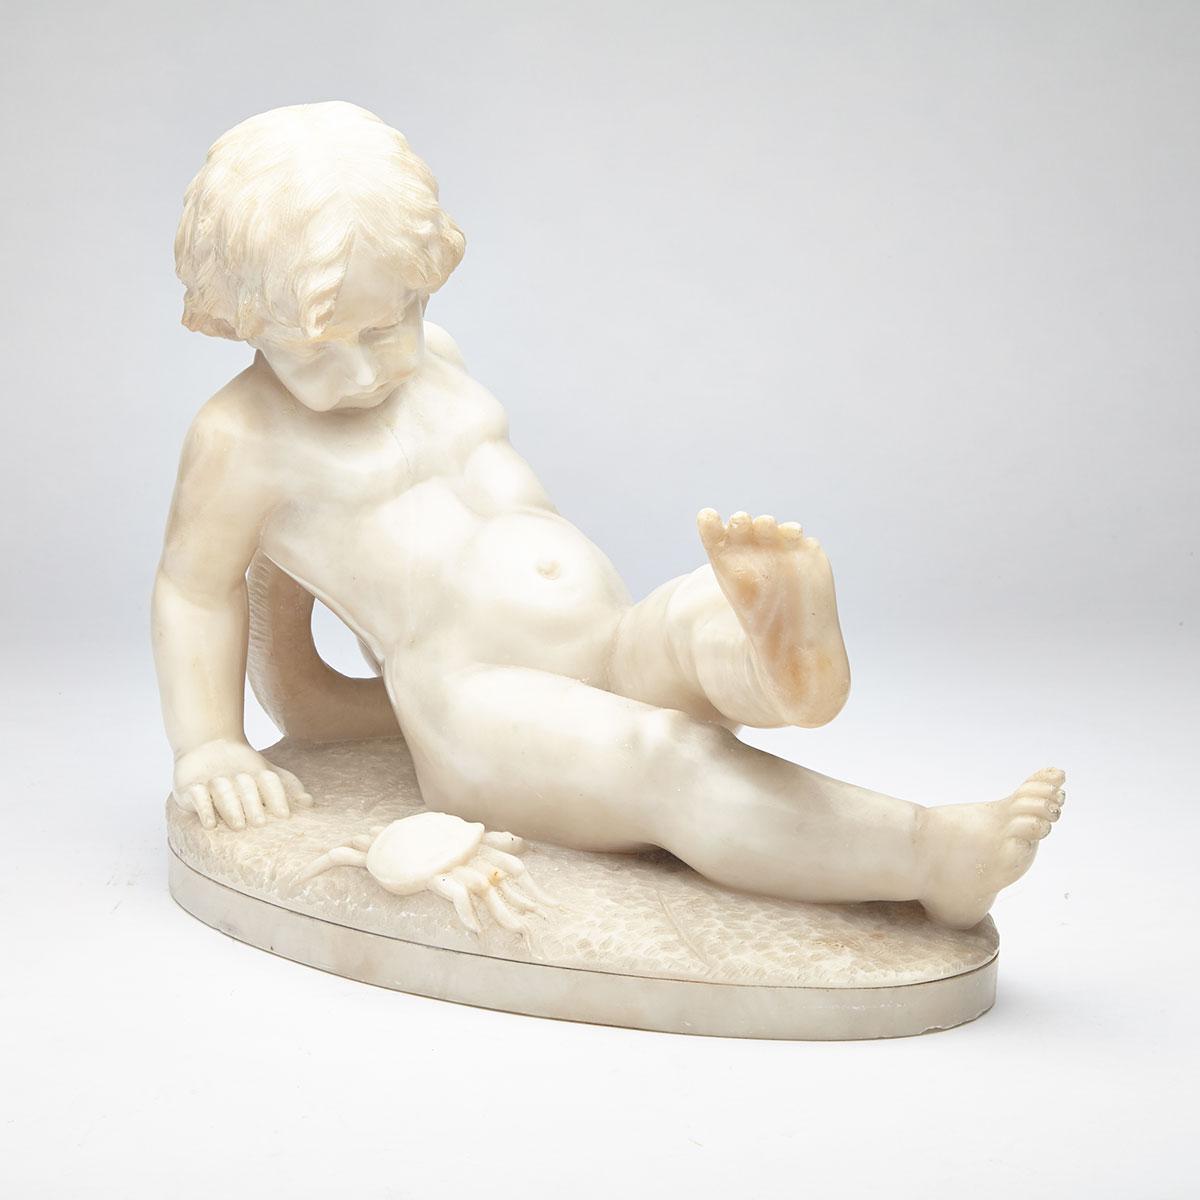 Italian Carved Marble Figure of a Young Child at Seaside with Crab and Life Buoy, c.1900